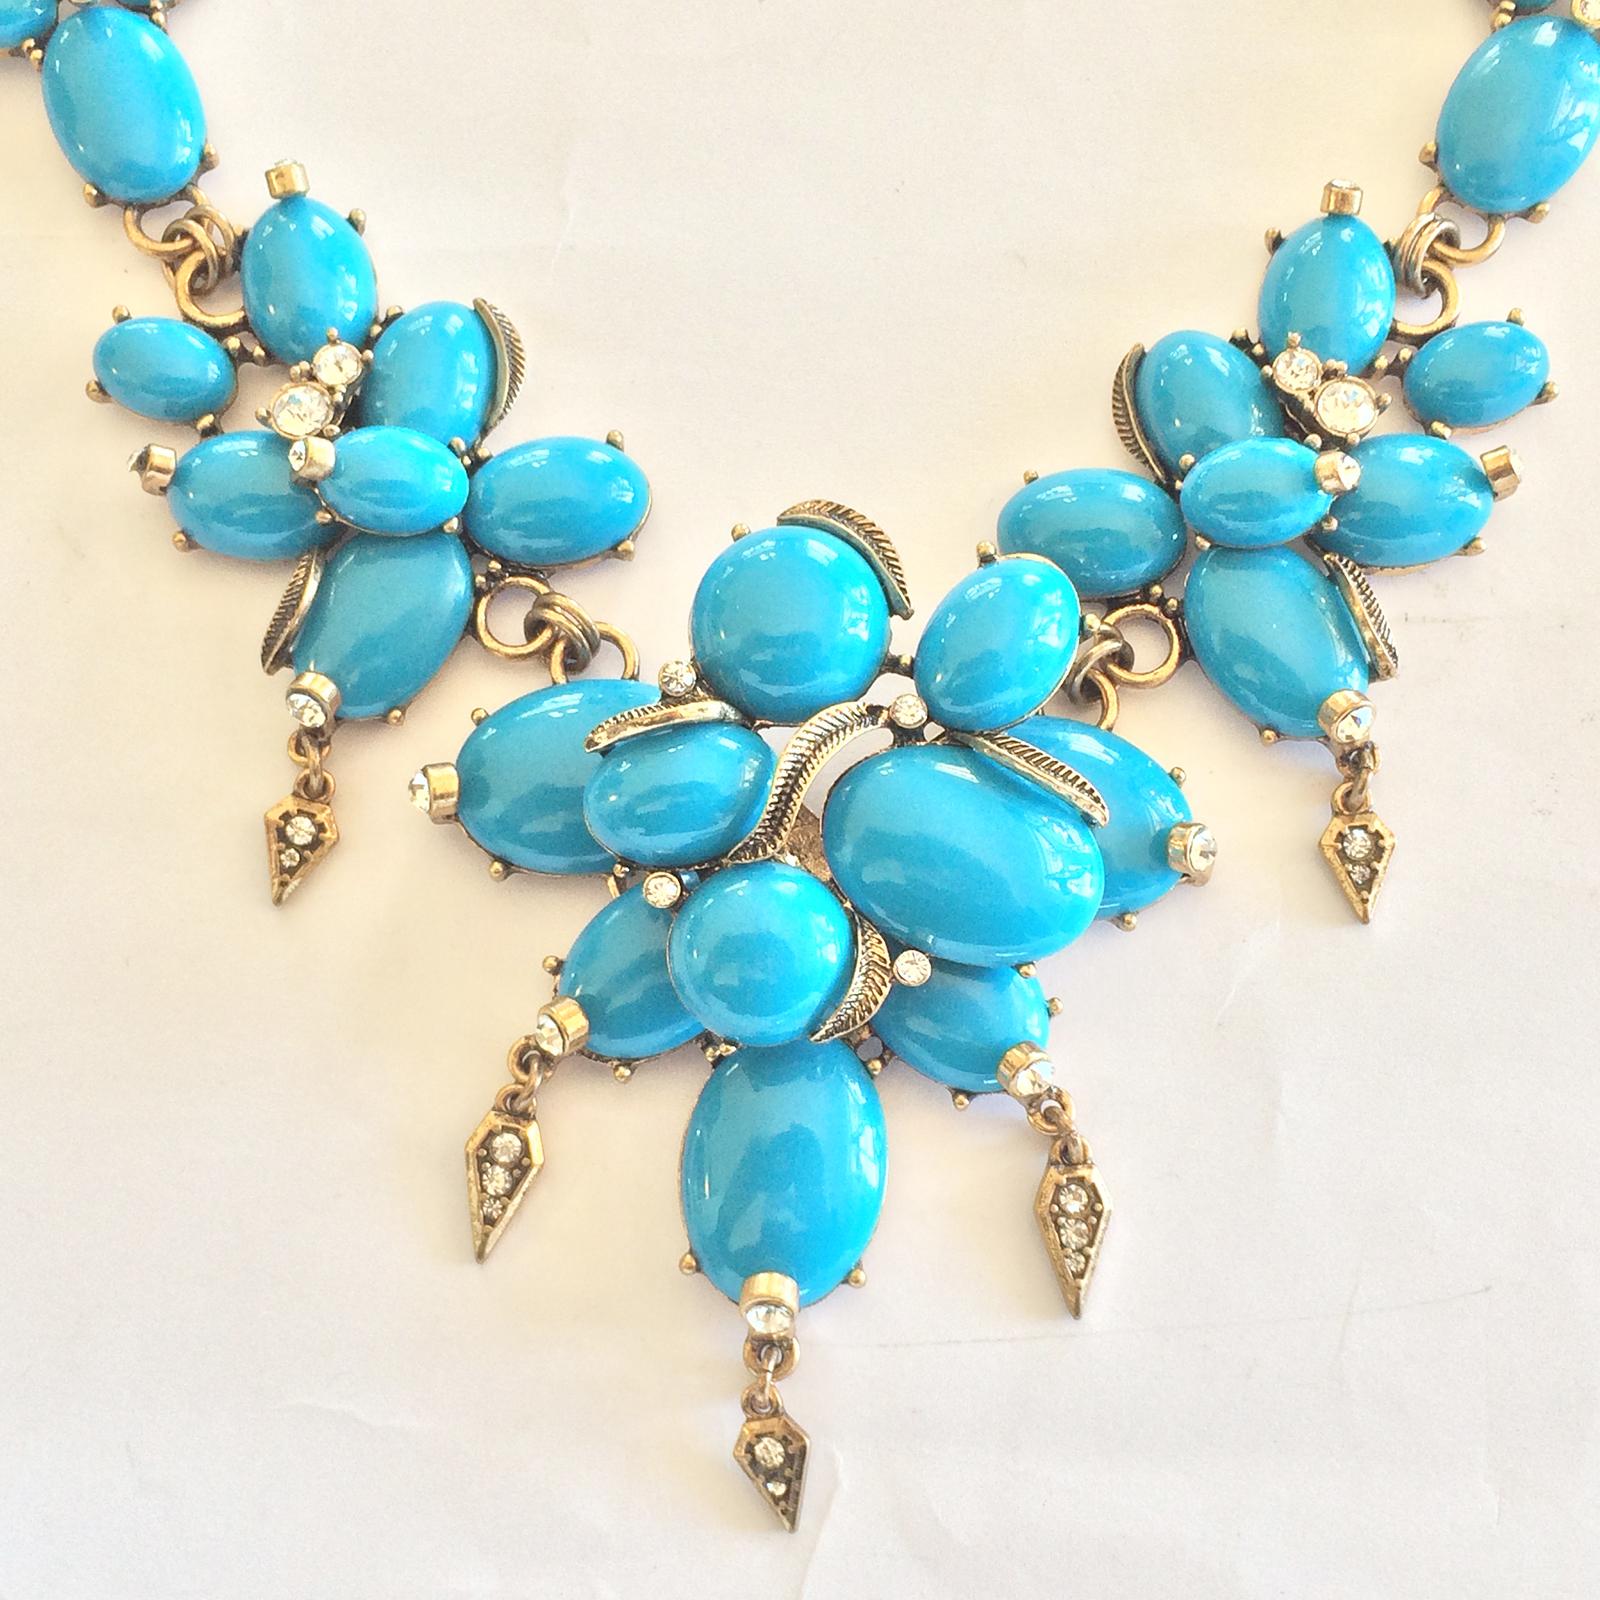 Autentic Oscar De La Renta, “Robin’s Eggs” Blue Cabochons , White Diamantes, with a 3D, centre Pendant area that is suspended forward of the lower Necklace area. A stunning design that is made especially for Runway wear to attract the watchers eyes,